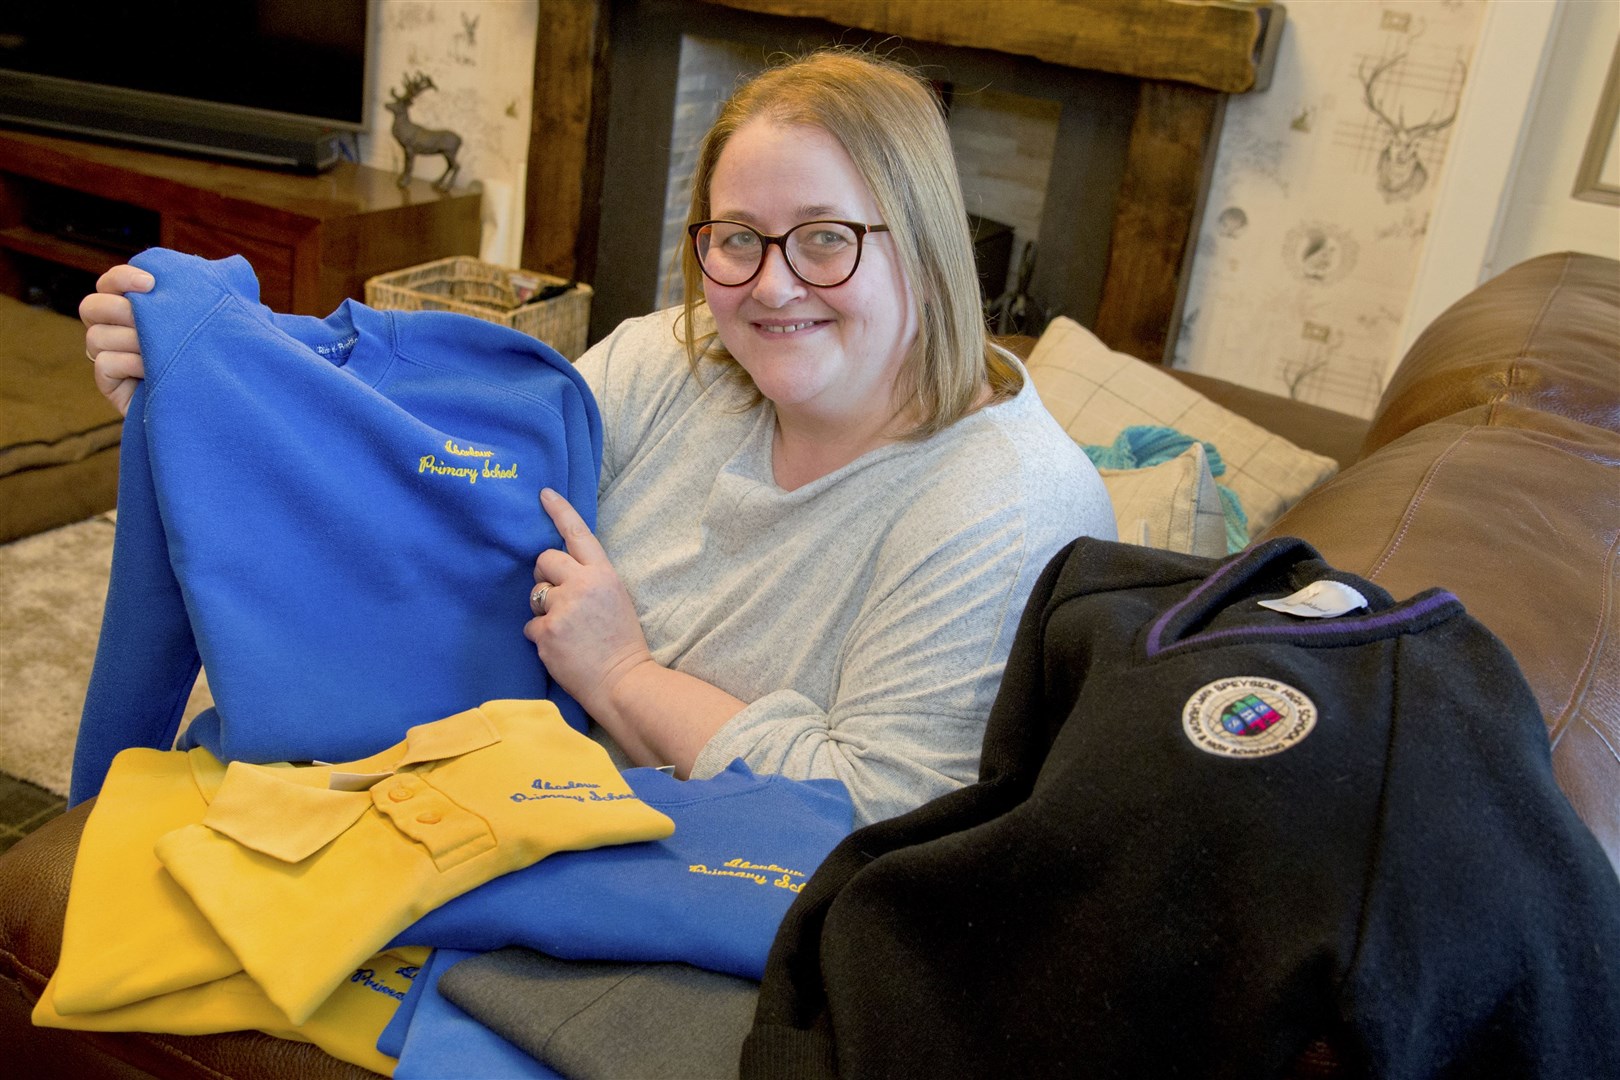 Debi Weir who set up Moray School Bank along with her teenage daughter Hannah to help children in need of school clothes. Picture: Daniel Forsyth.